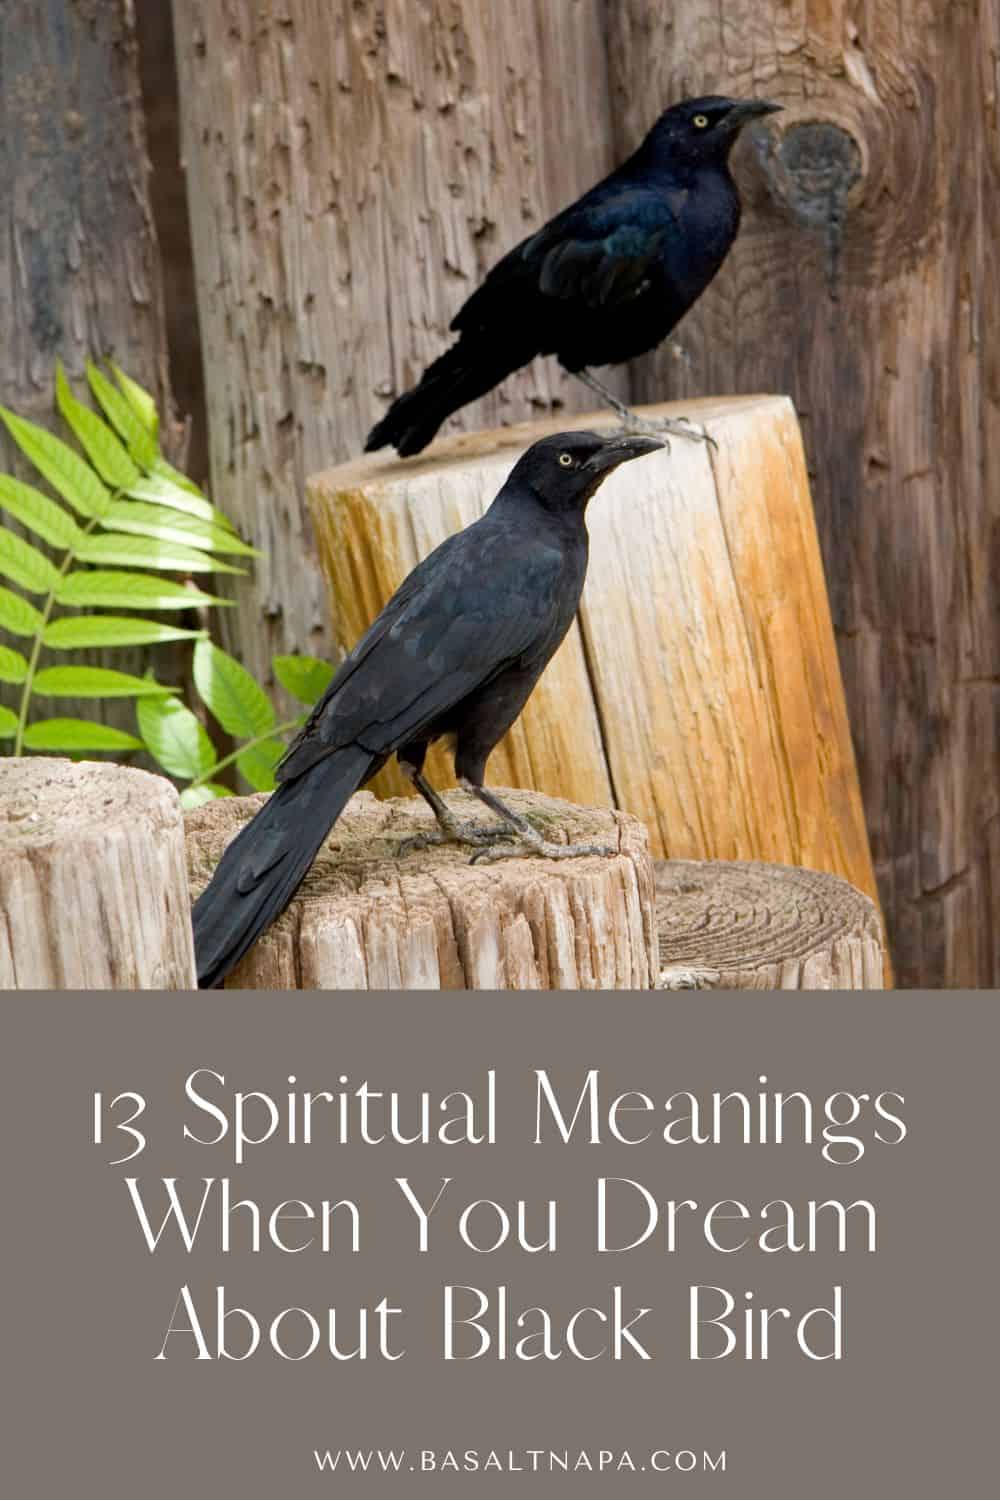 13 Spiritual Meanings When You Dream About Black Bird